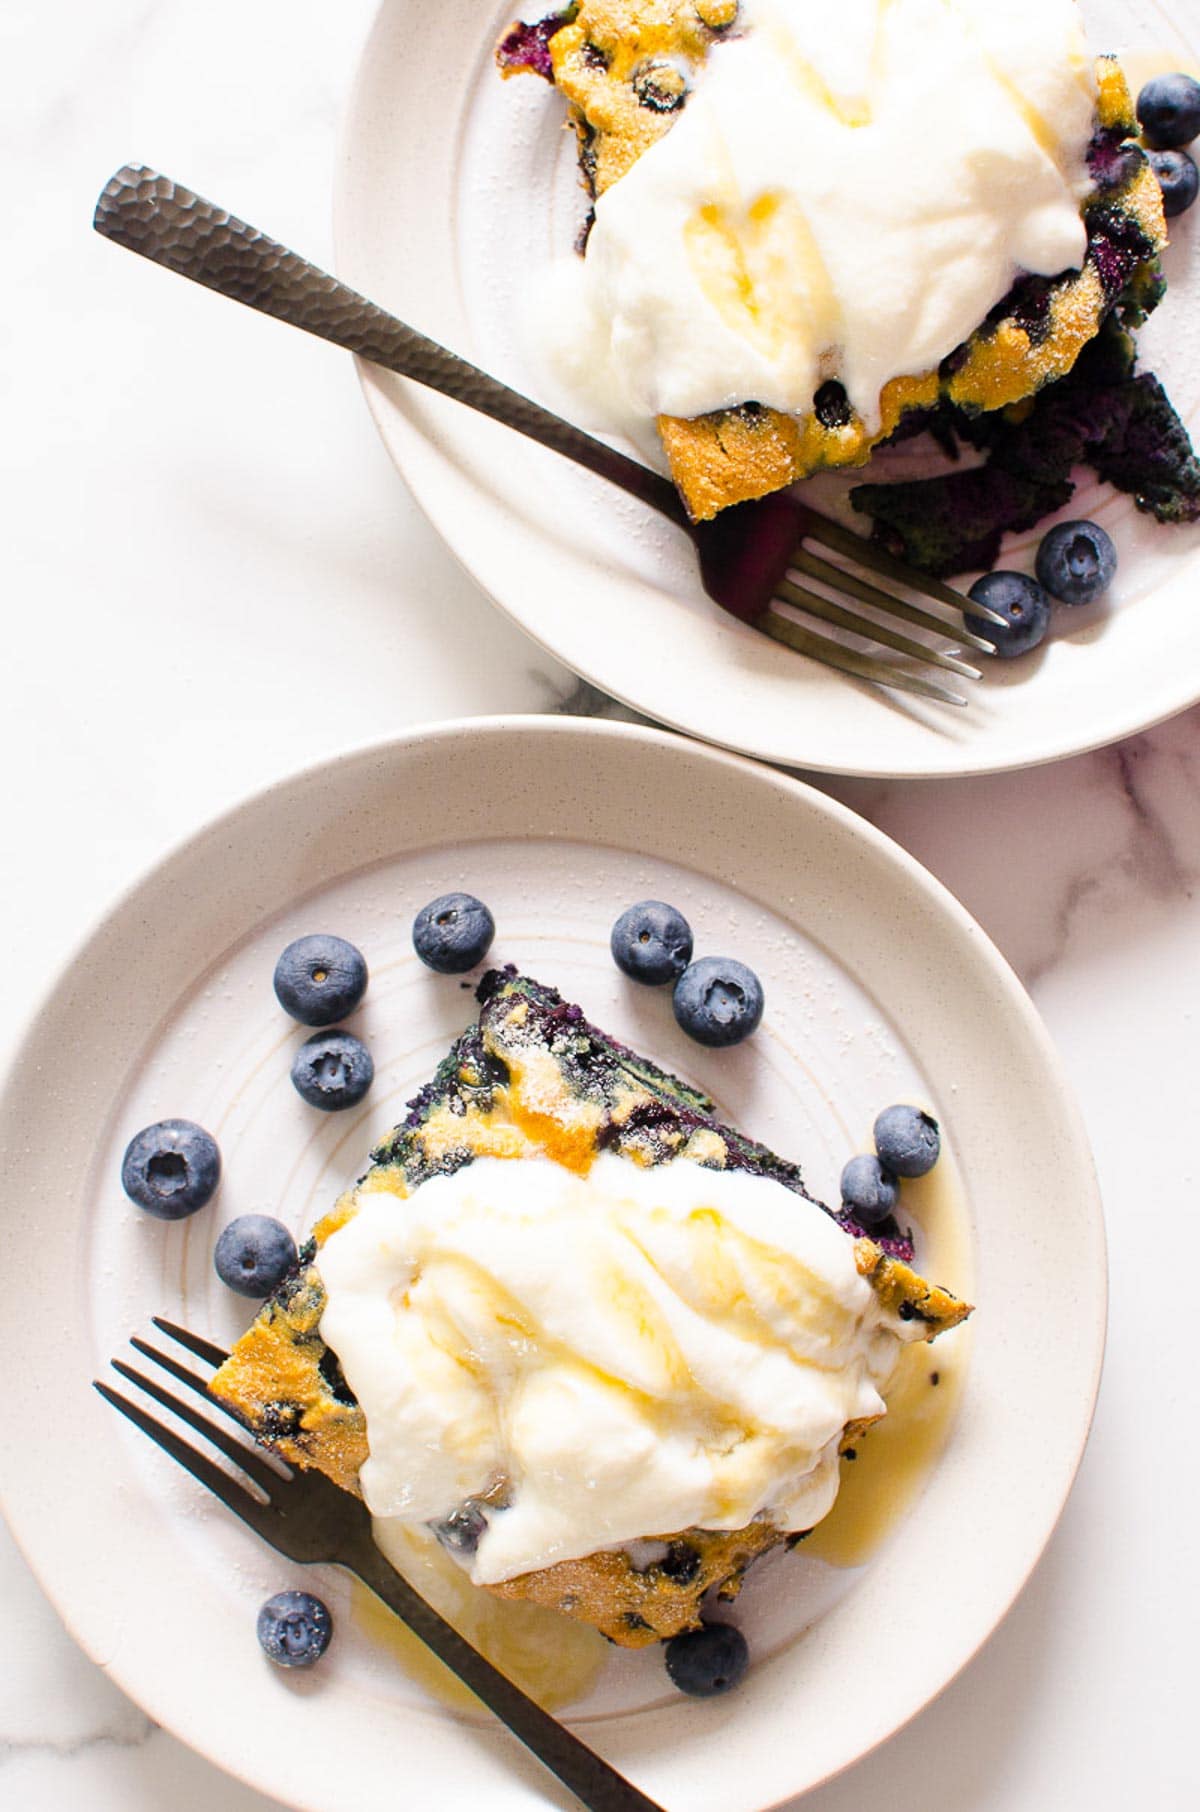 Two slices of blueberry breakfast cake on plates with yogurt and fresh blueberries.